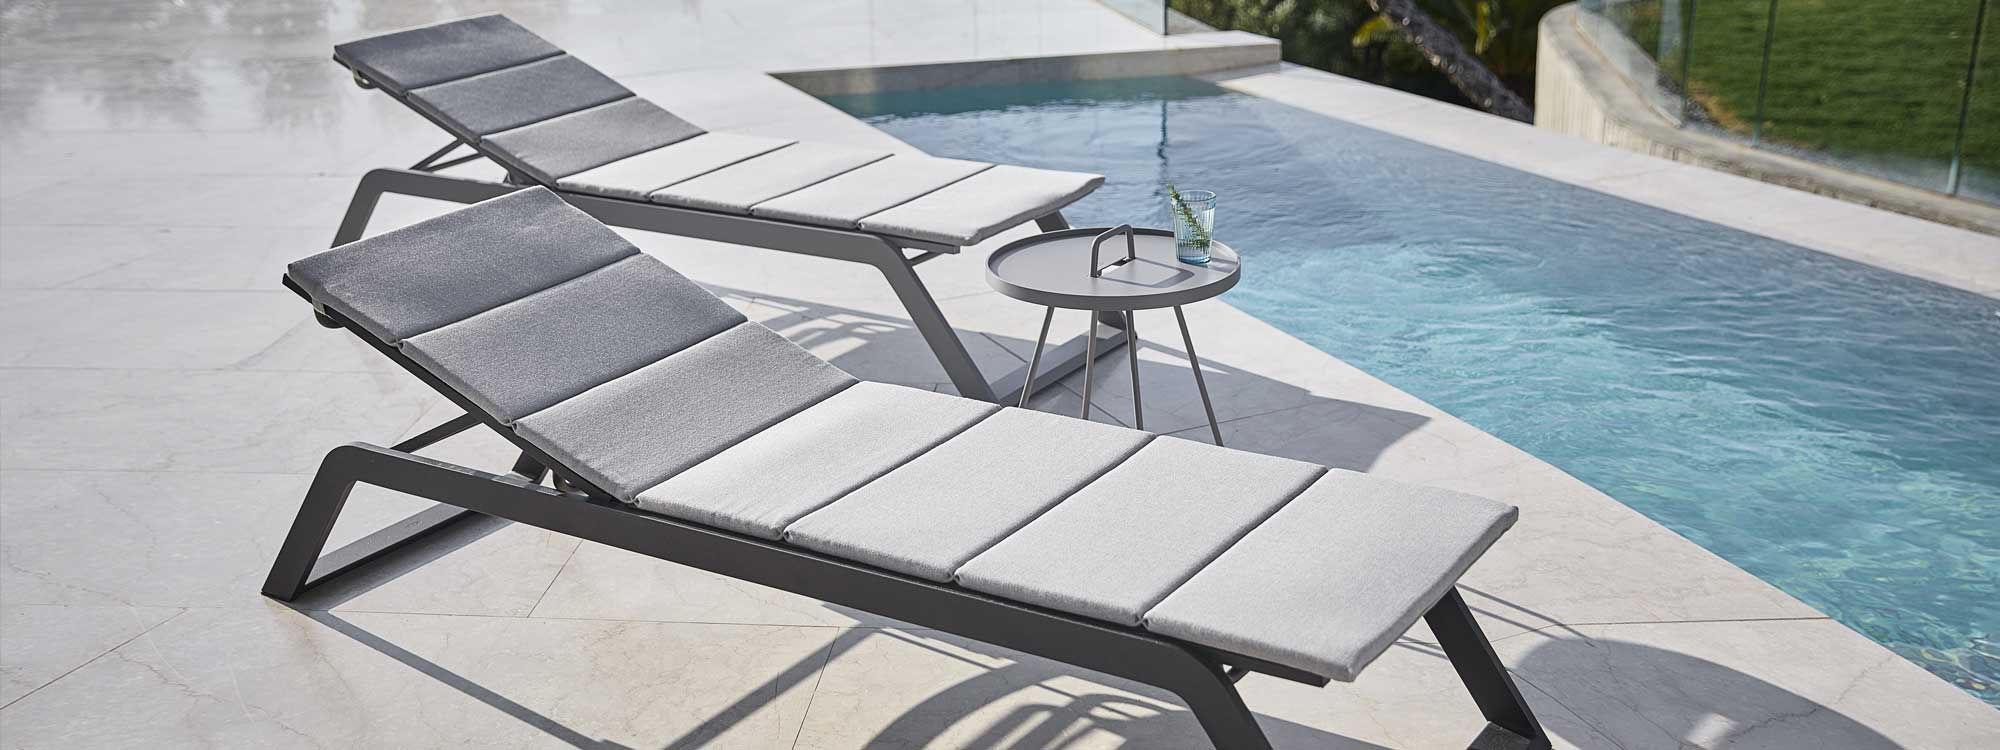 Siesta SUN LOUNGER Is A STACKABLE ADJUSTABLE Sunbed In HIGH QUALITY Outdoor Furniture Materials By Cane-line MODERN GARDEN FURNITURE